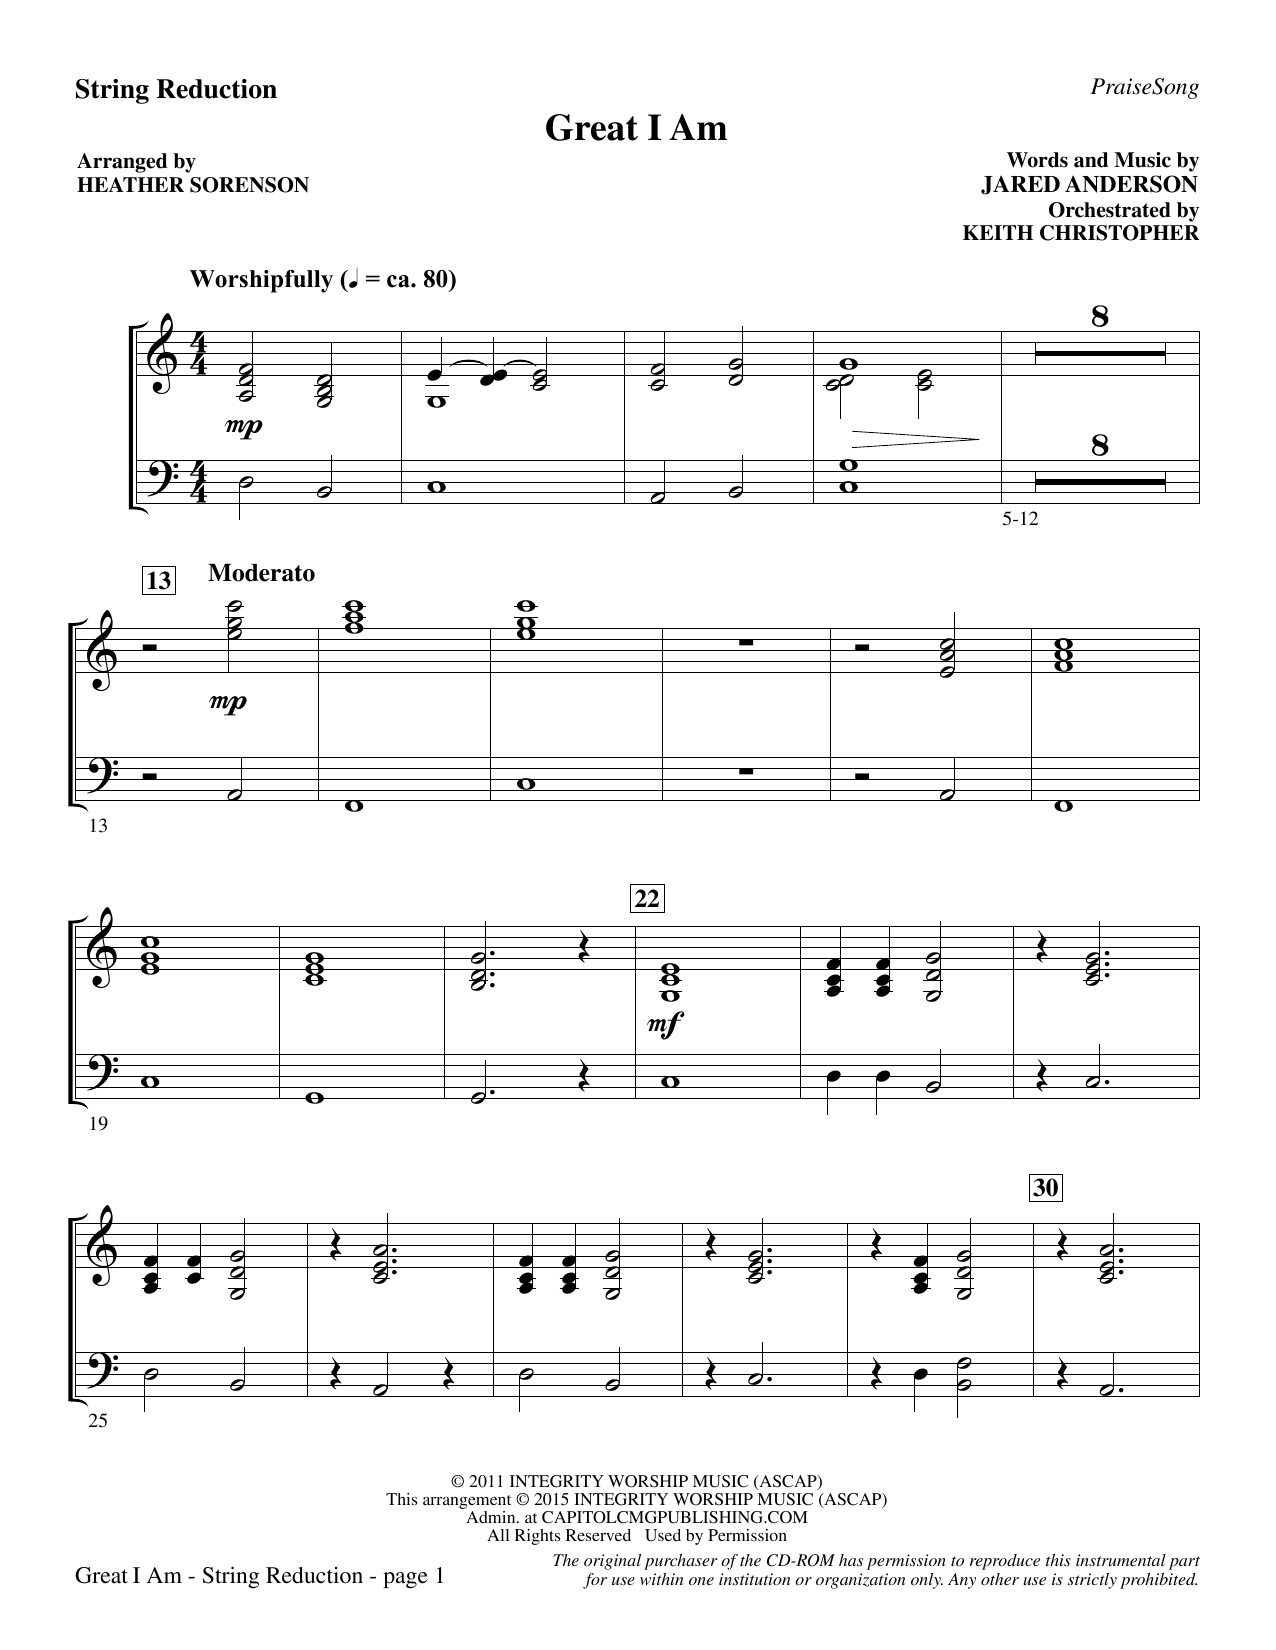 Heather Sorenson Great I Am - Keyboard String Reduction sheet music notes and chords. Download Printable PDF.